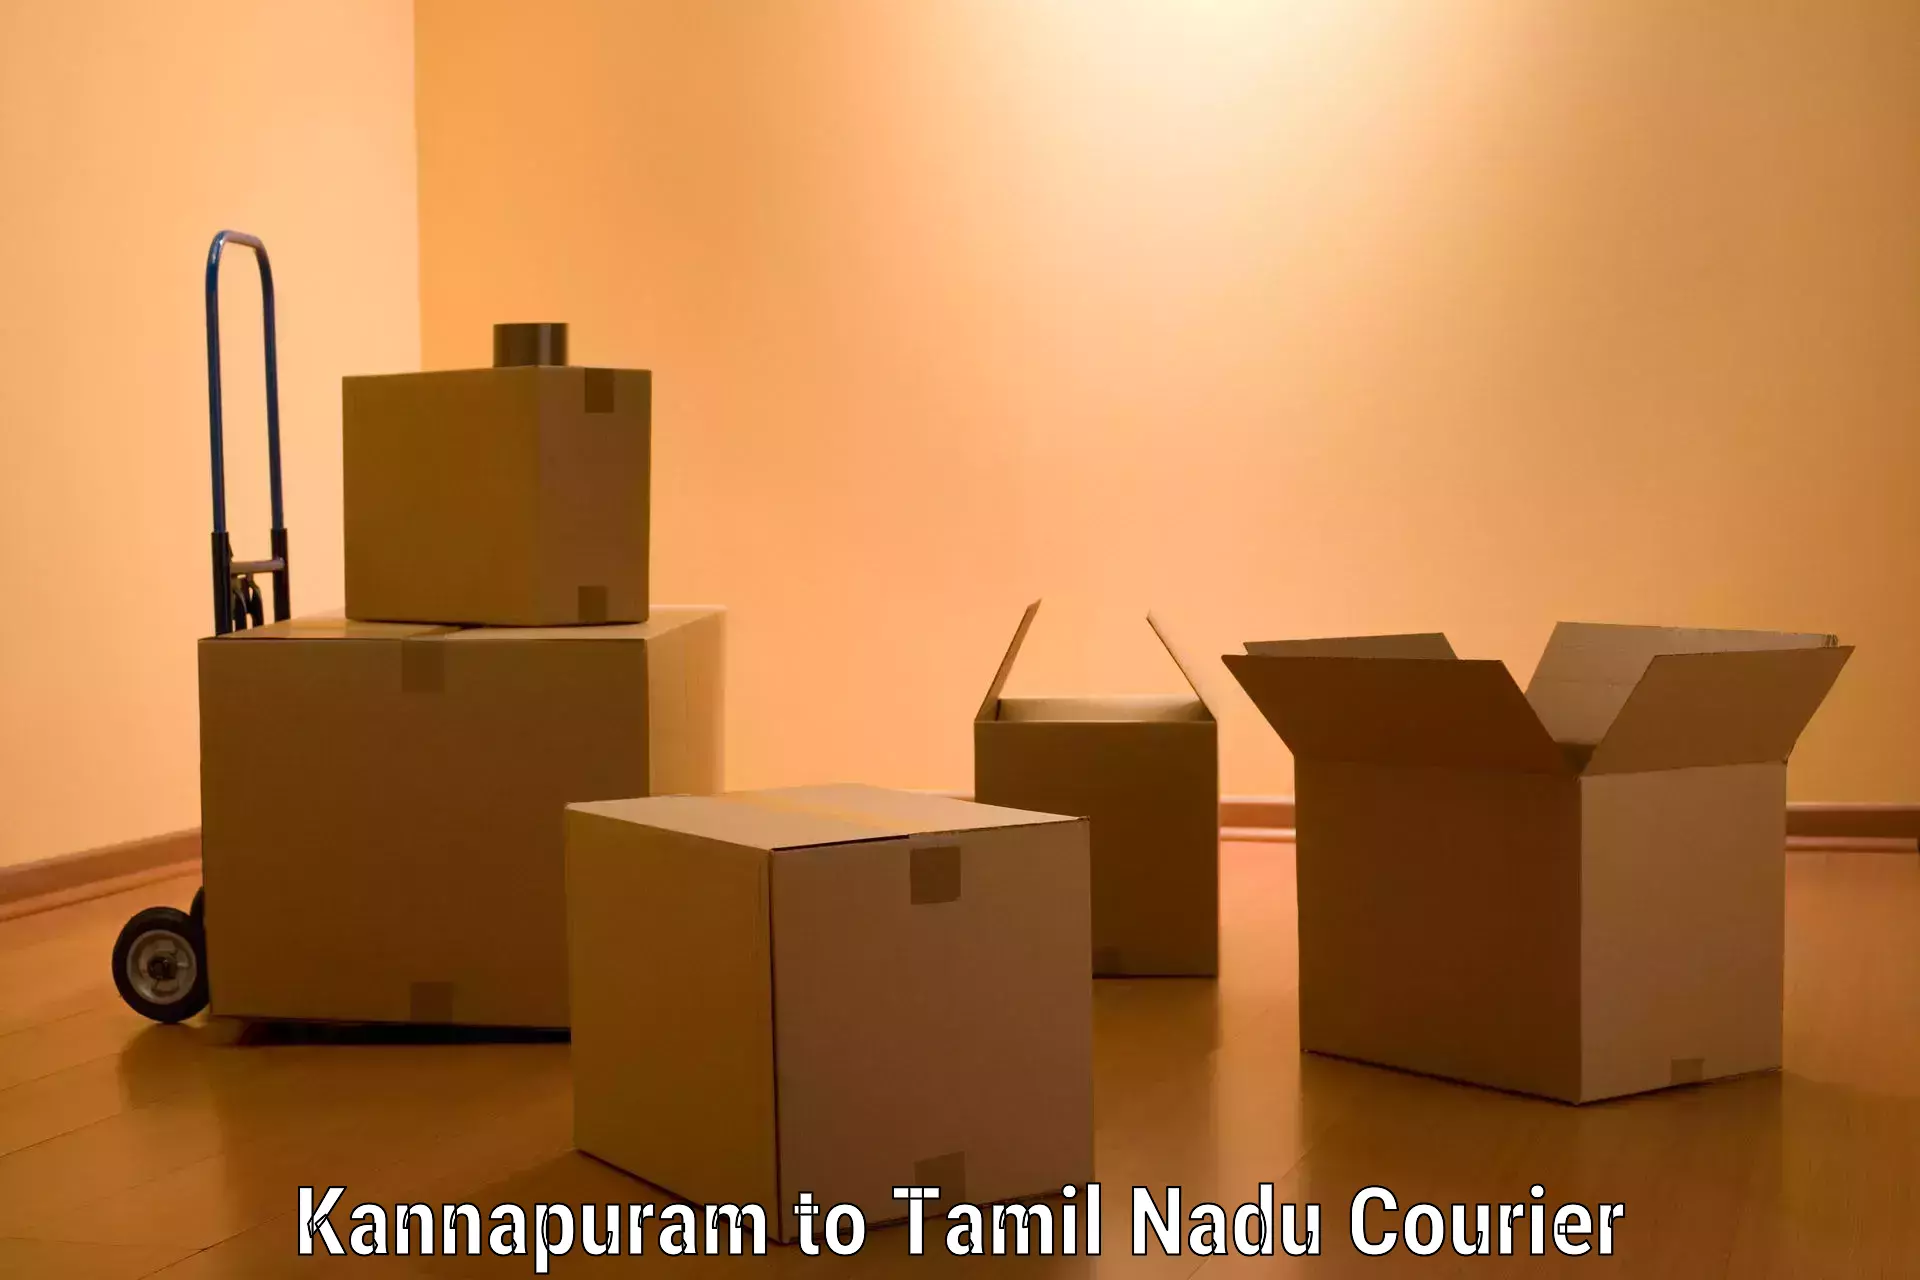 Stress-free moving Kannapuram to Shanmugha Arts Science Technology and Research Academy Thanjavur